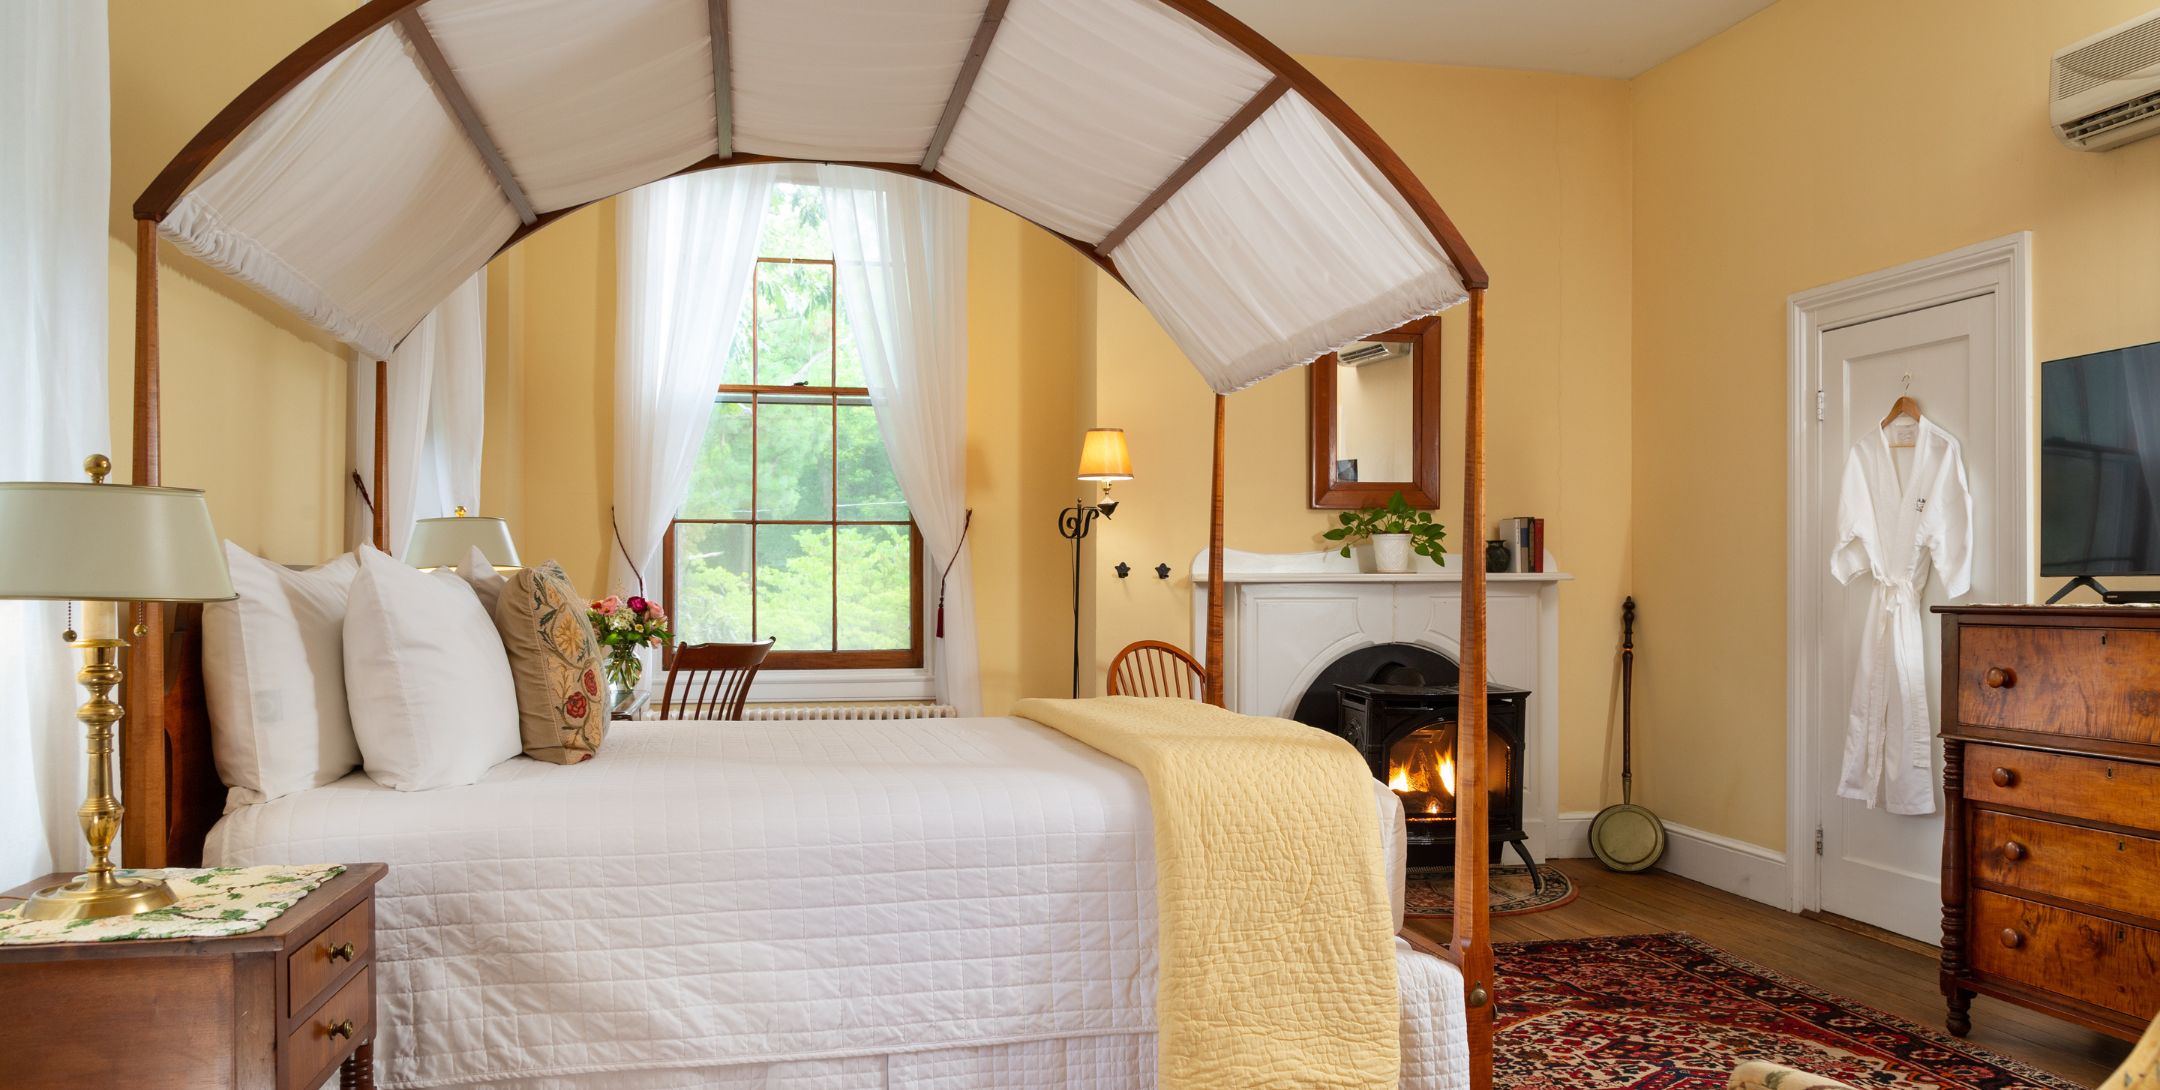 Buttery yellow guest room with natural light, fire stove, and arched canopy bed with white bedding and canopy